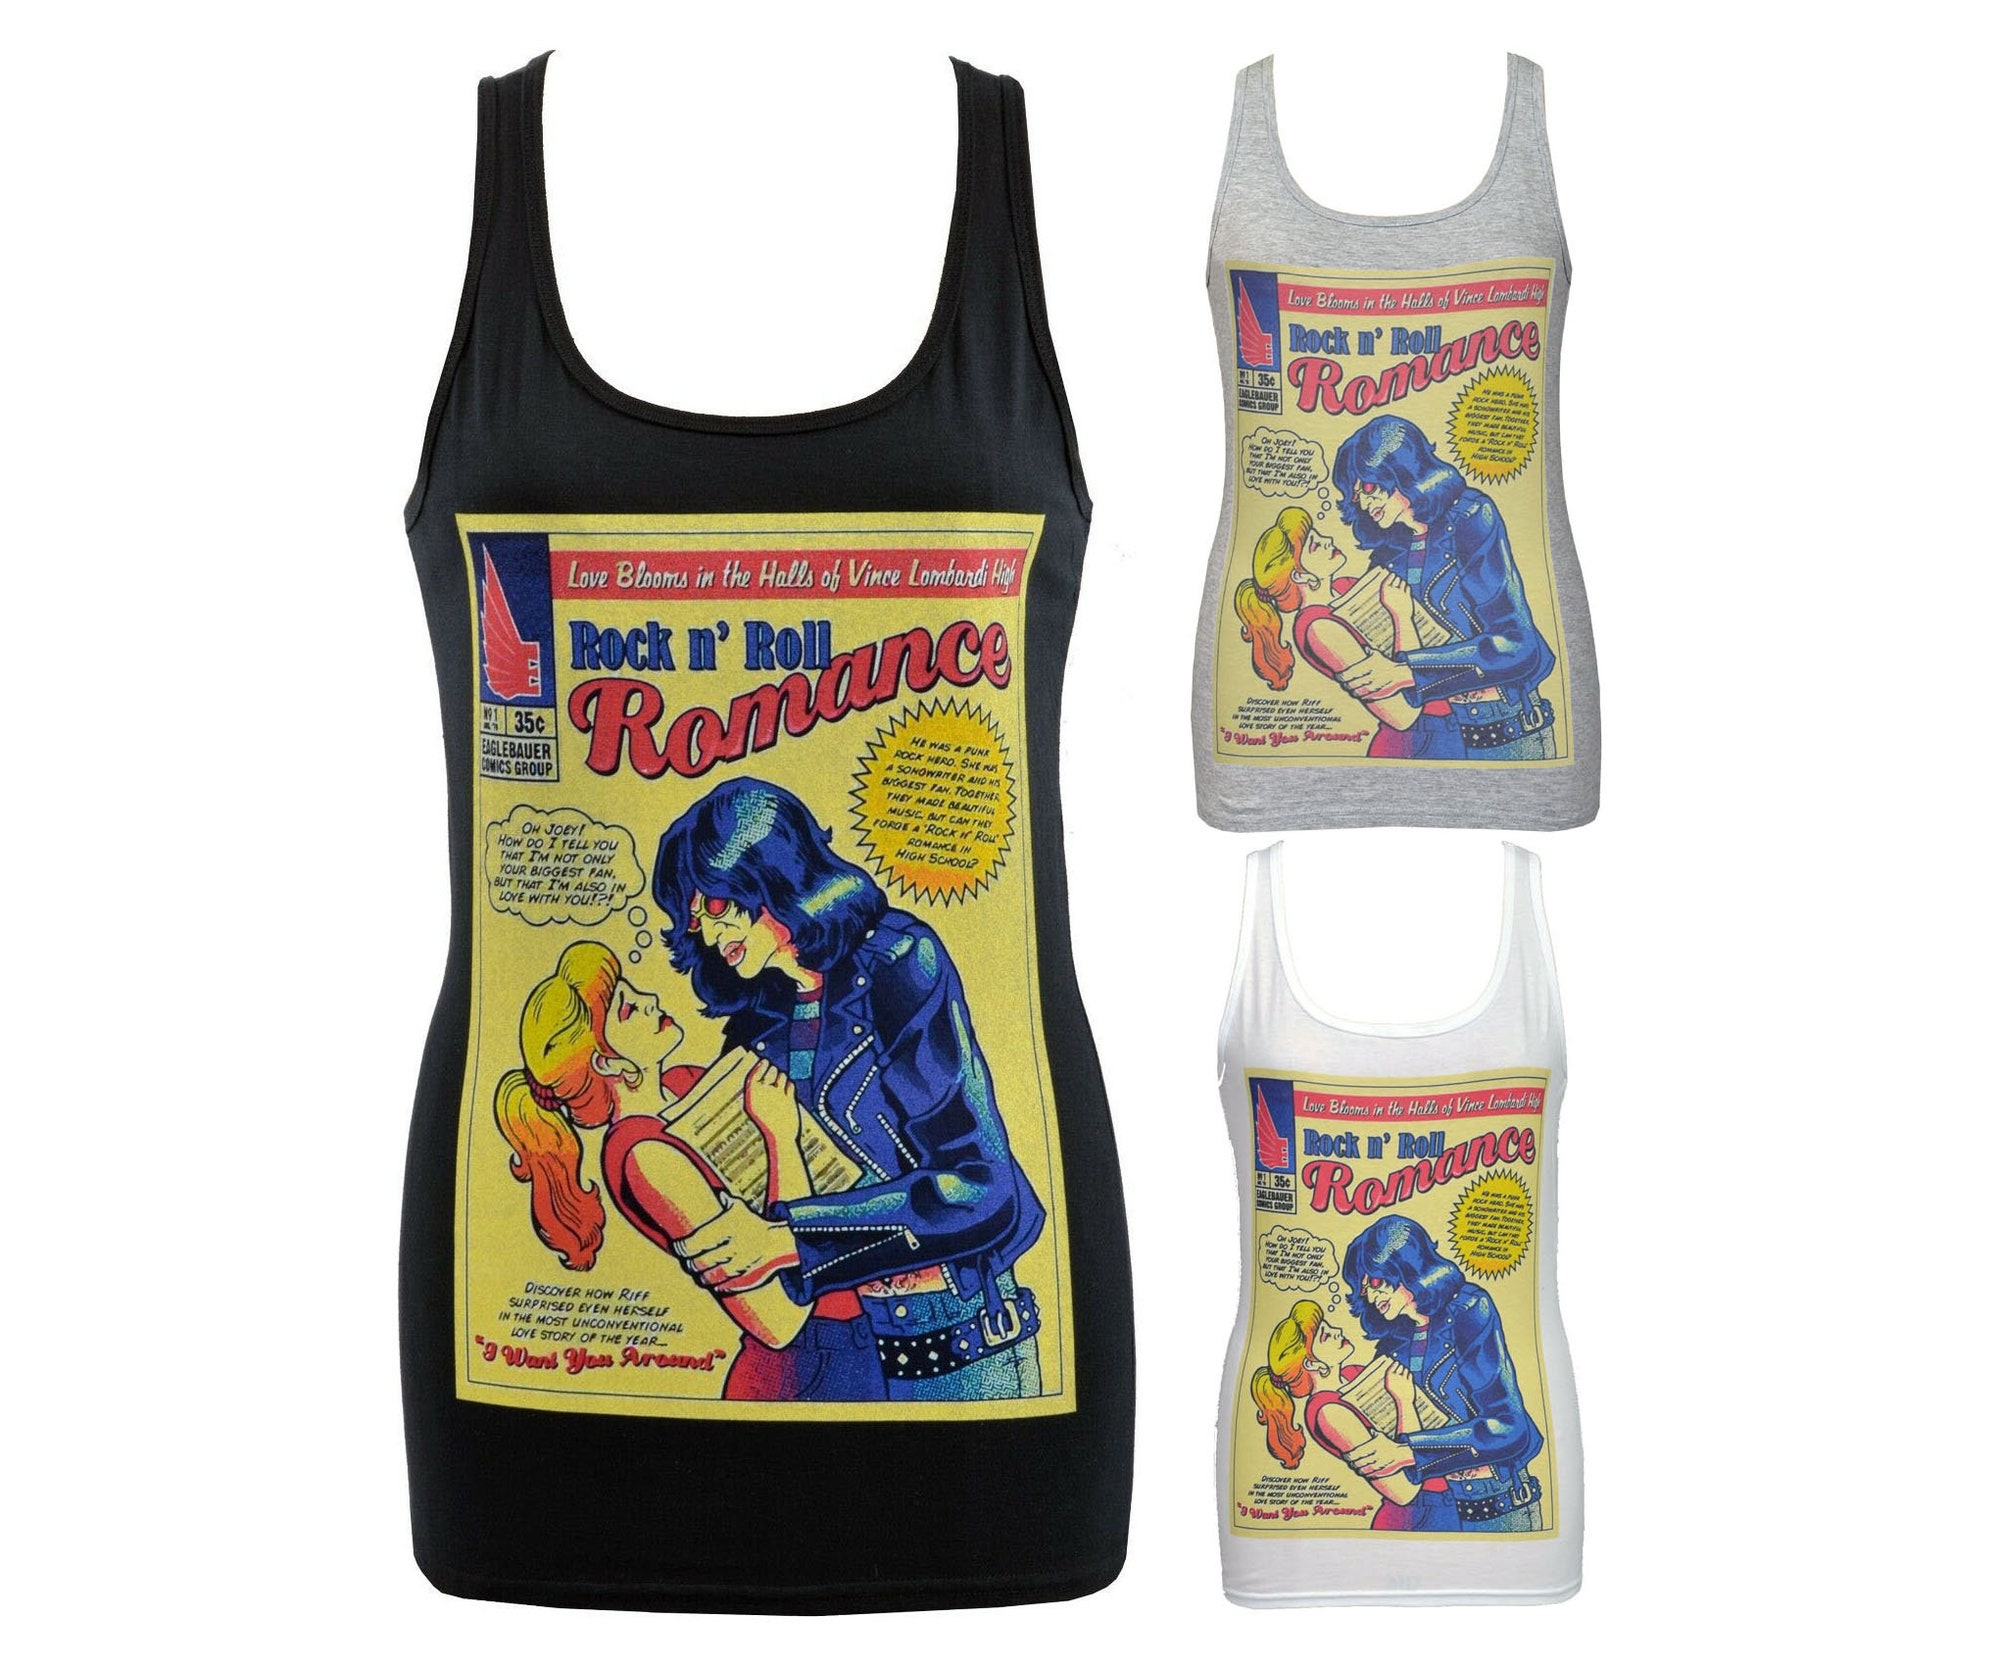 Discover Punk Tank Top Rock and Roll Romance